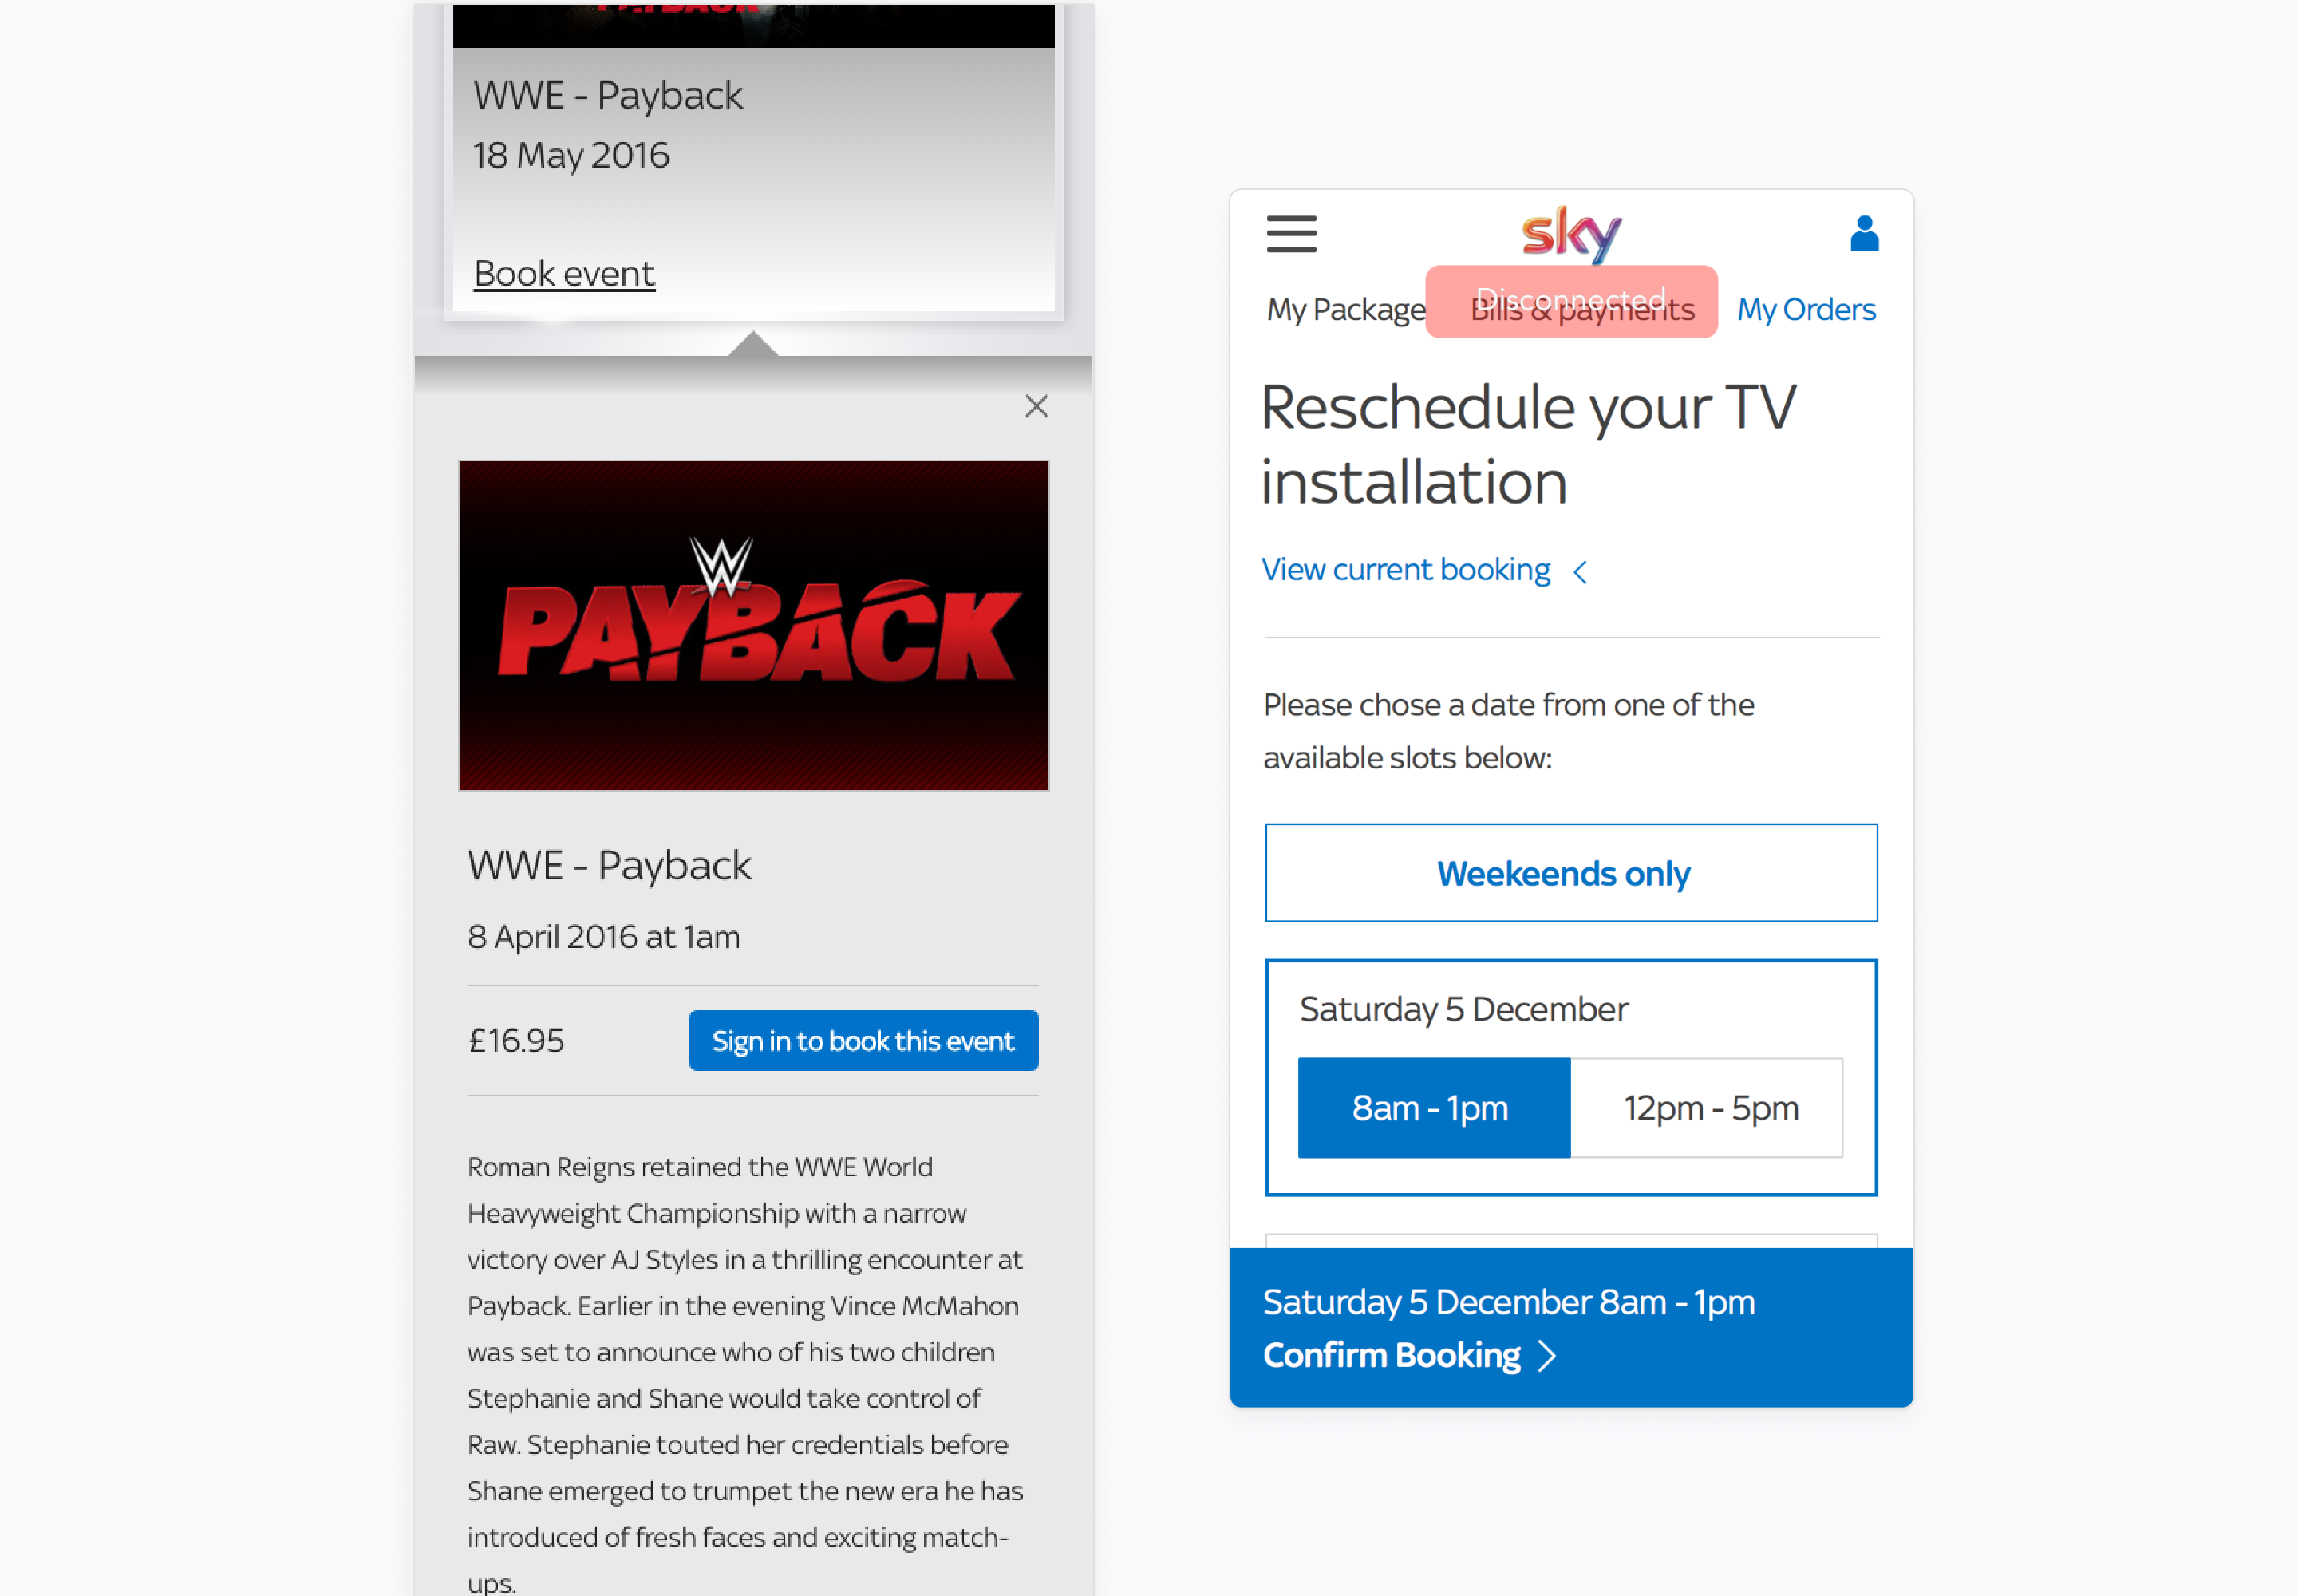 Sky Pay Per View and Order Tracking UI